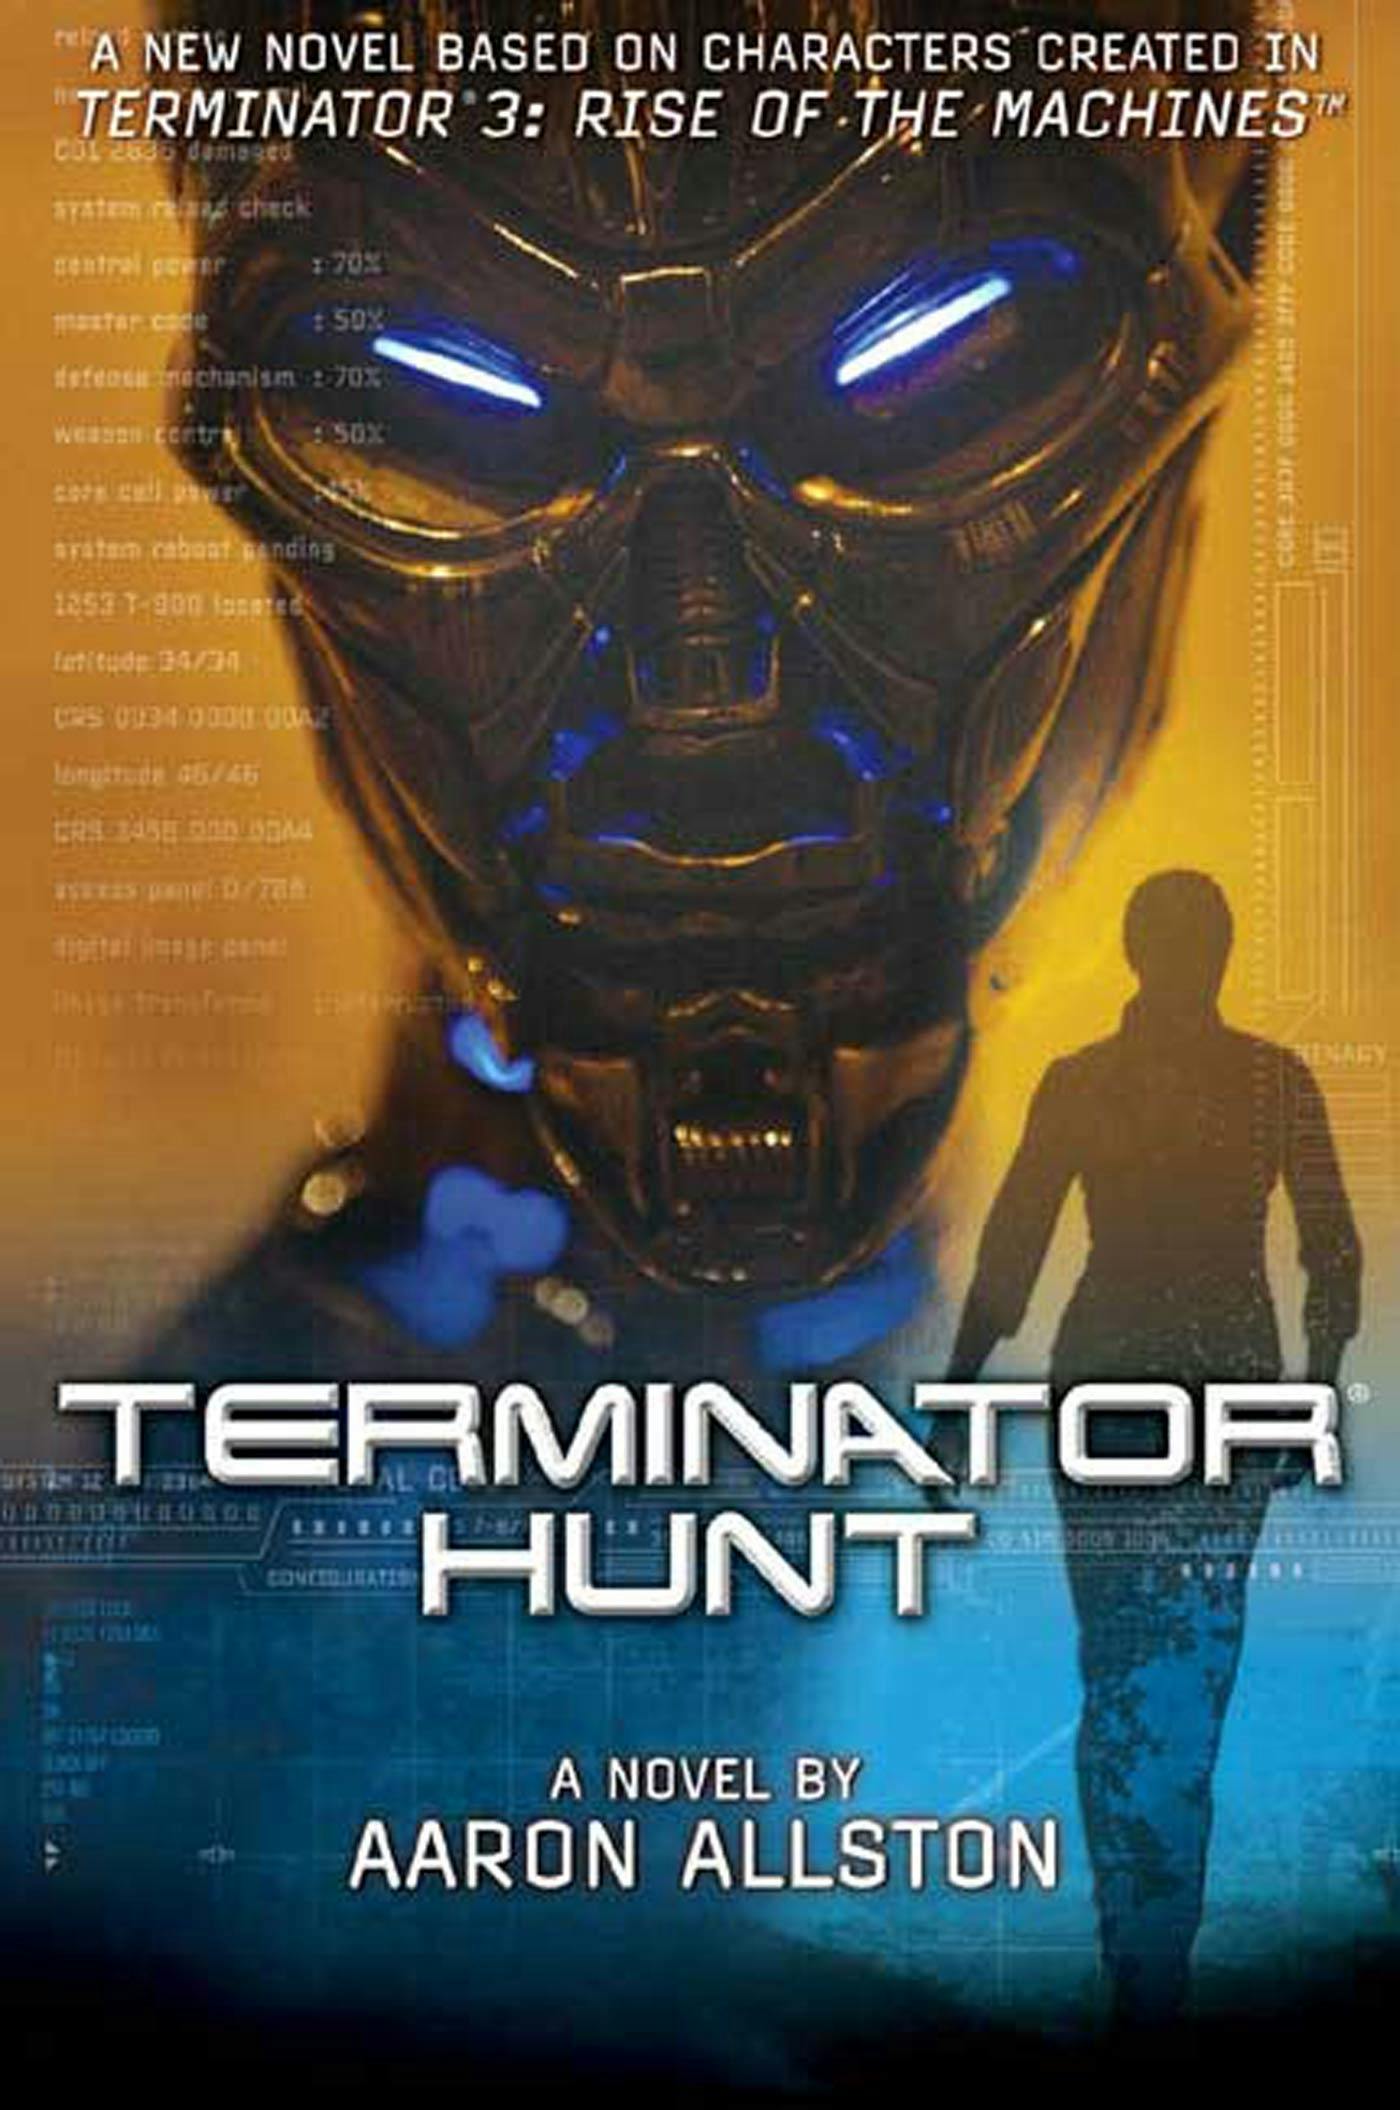 Cover for the book titled as: Terminator 3: Terminator Hunt